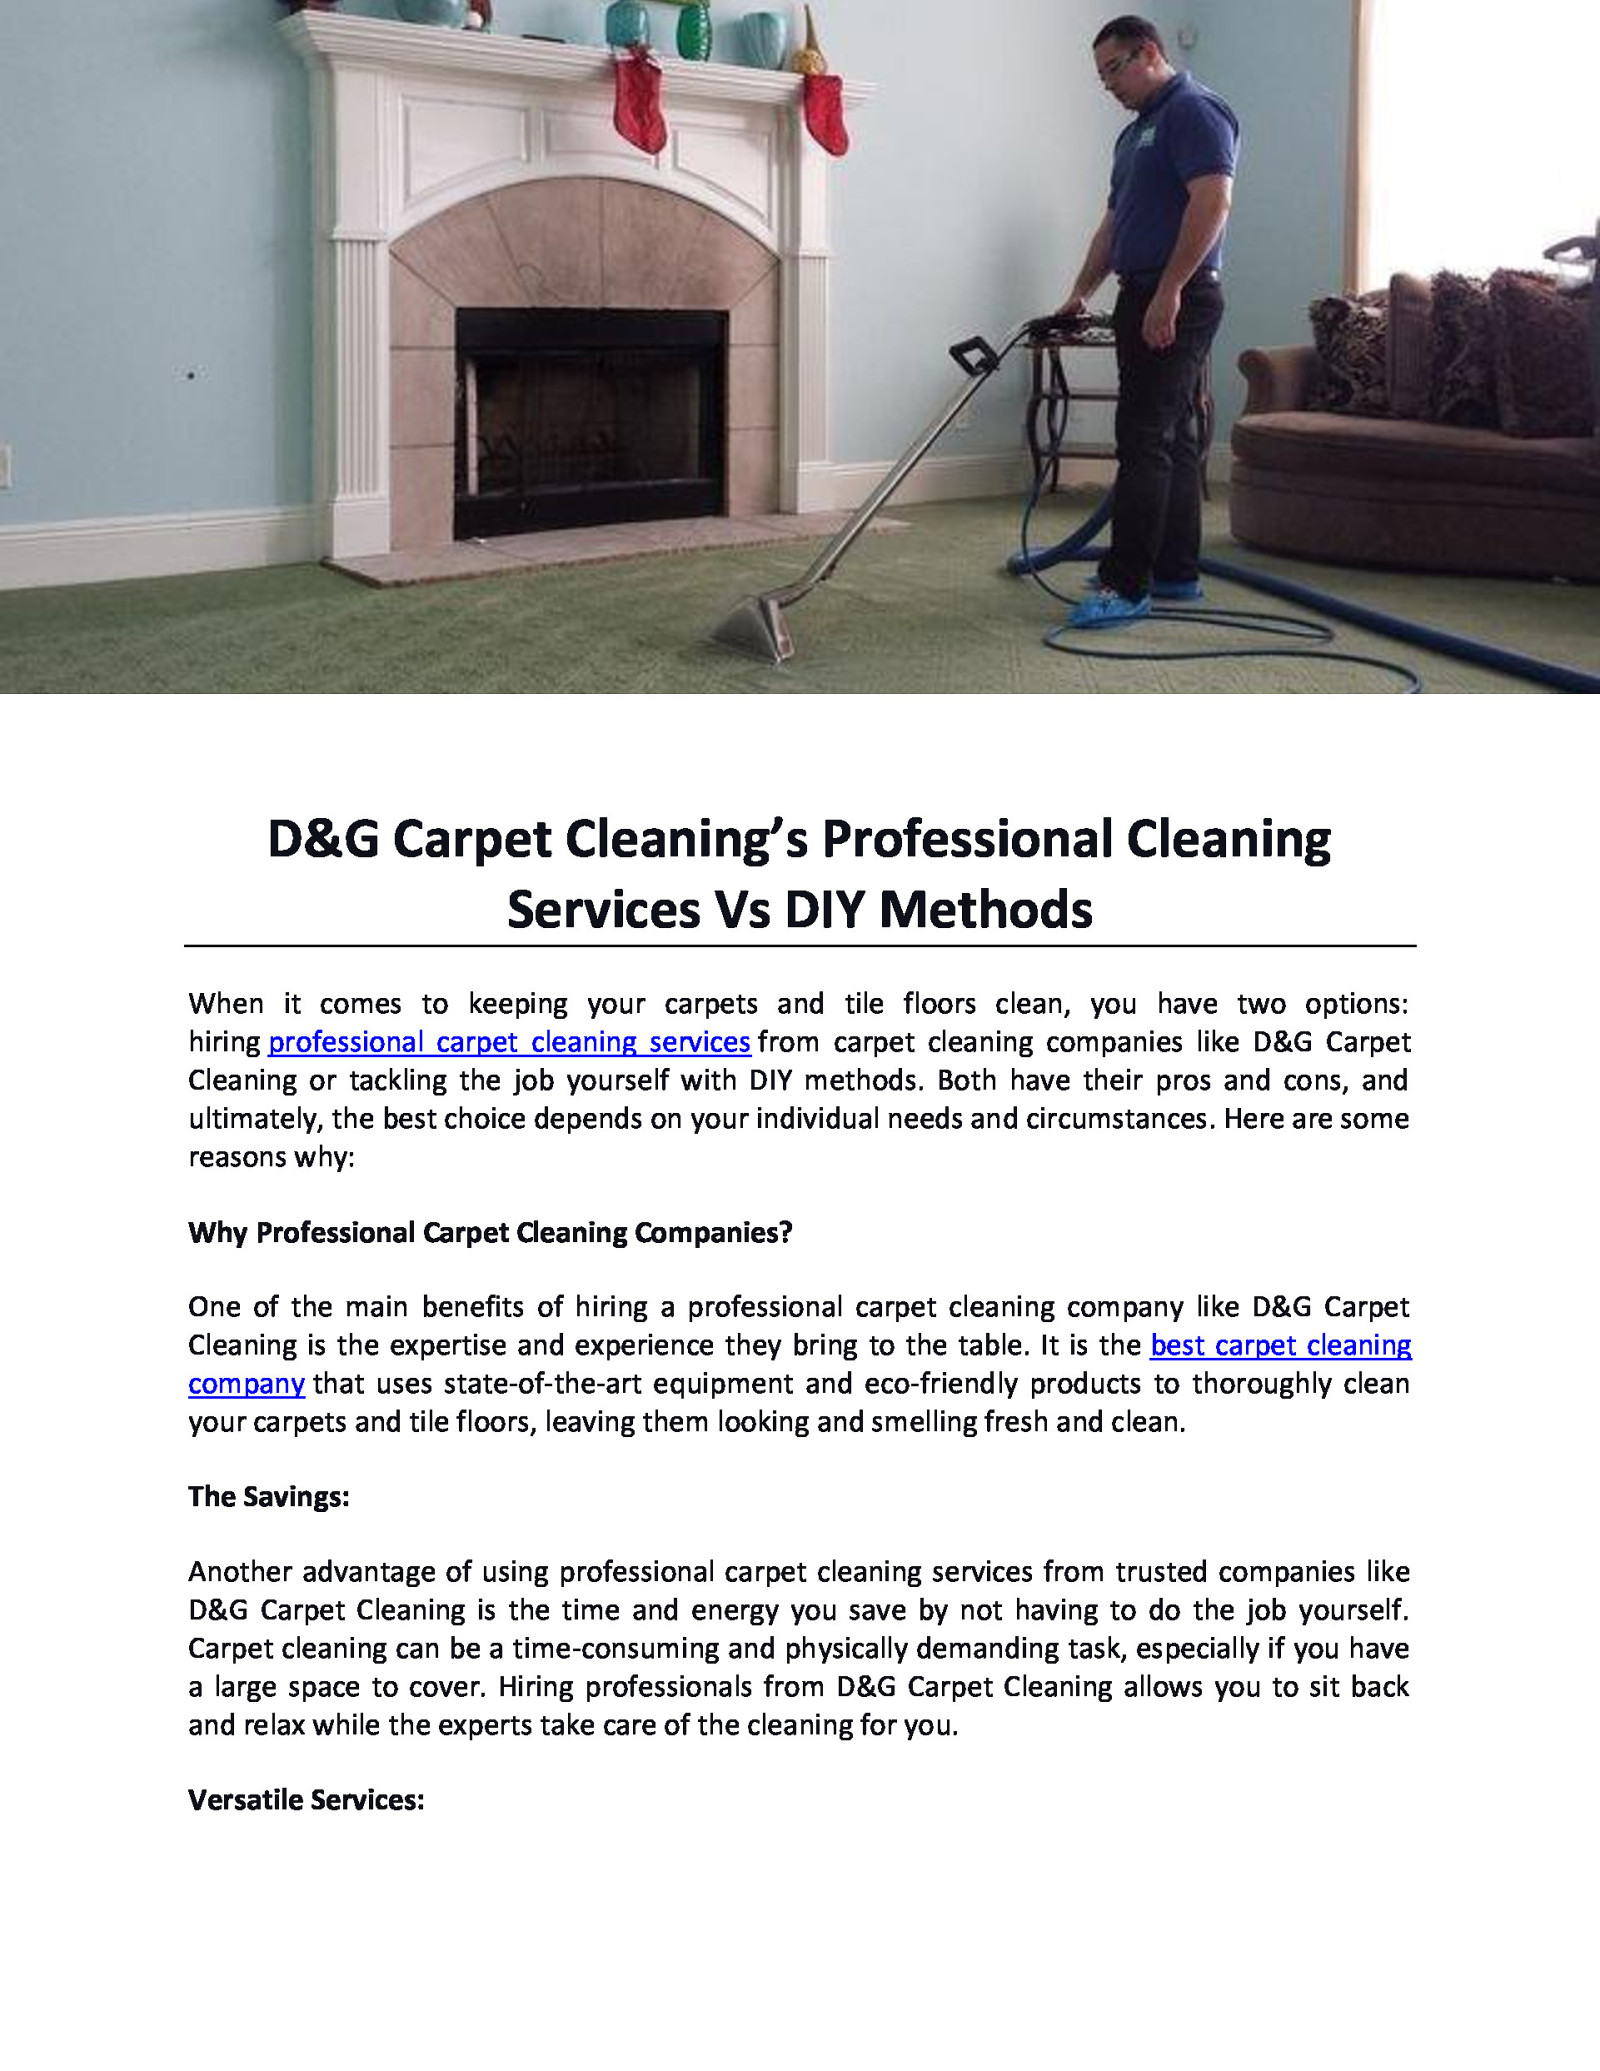 D&G Carpet Cleaning’s Professional Cleaning Services Vs DIY Methods